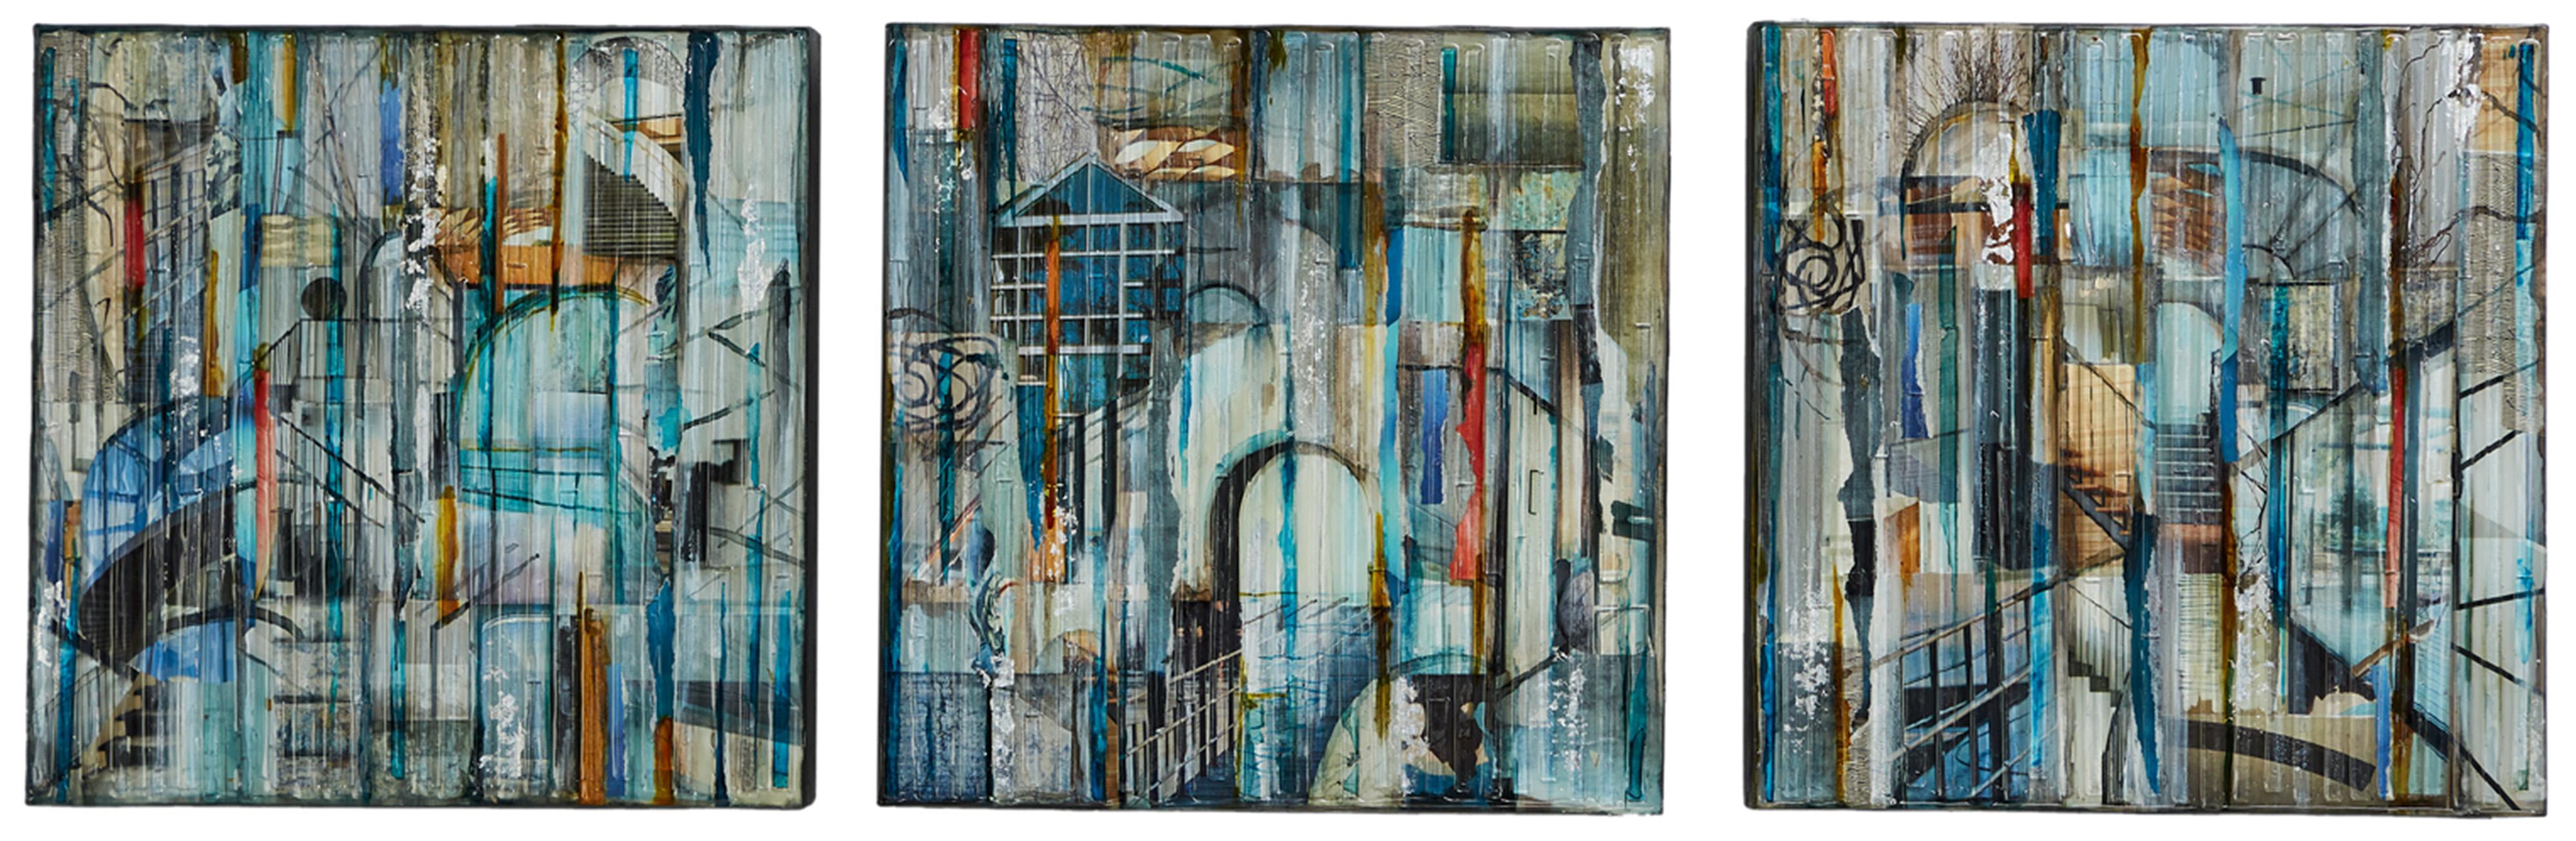 'Pathways', Mixed Media, Abstract Painting, Glass on Wood Panel Triptych - Mixed Media Art by Madonna Phillips